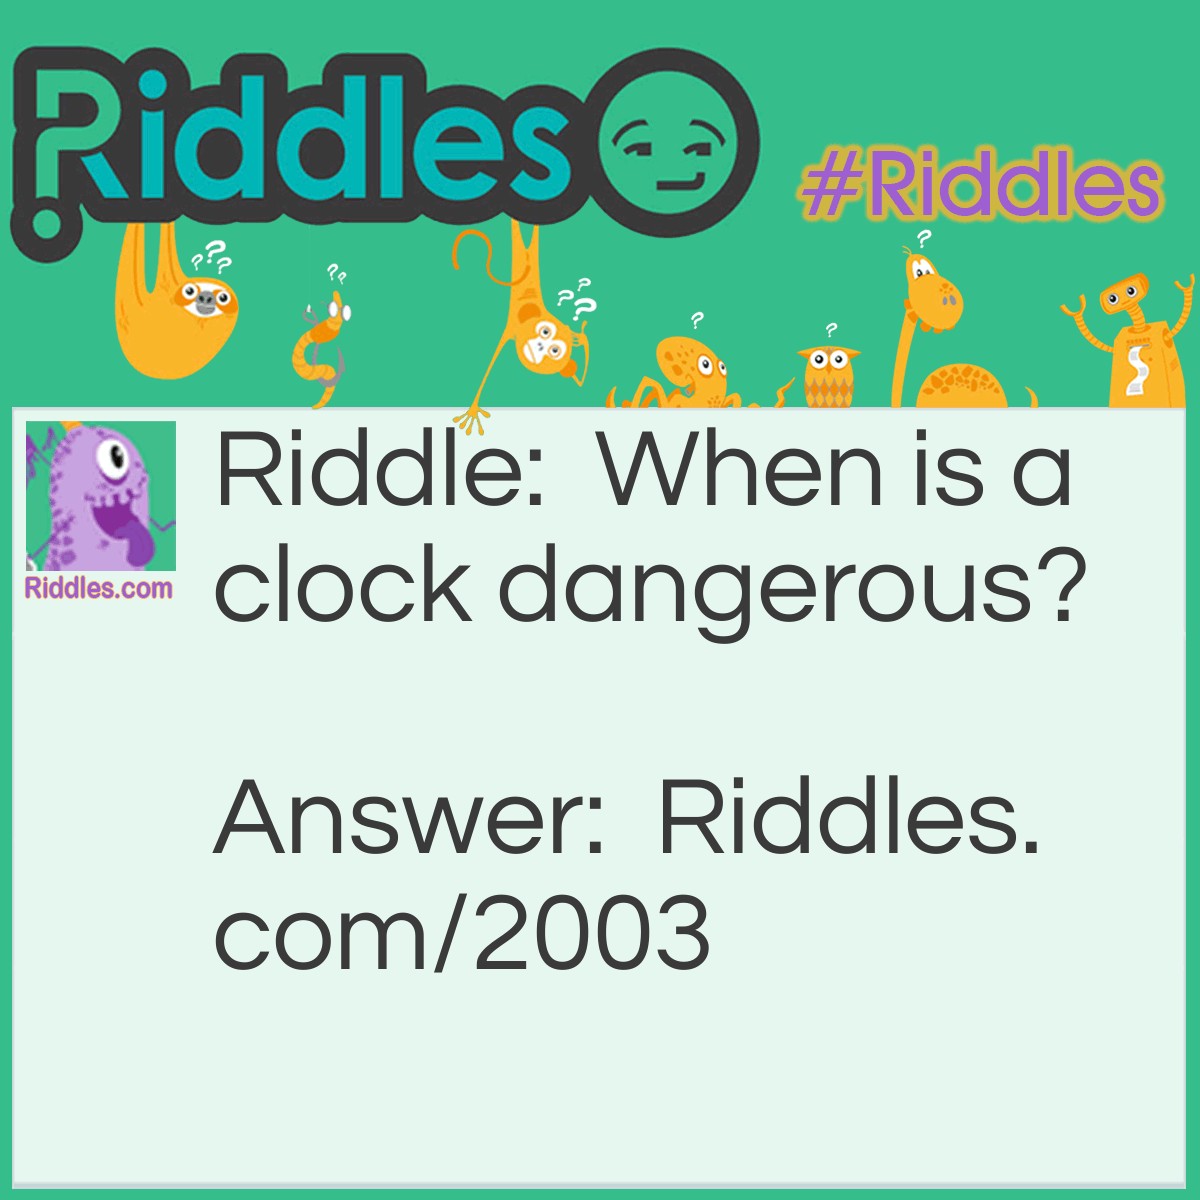 Riddle: When is a clock dangerous? Answer: When it runs down and strikes.